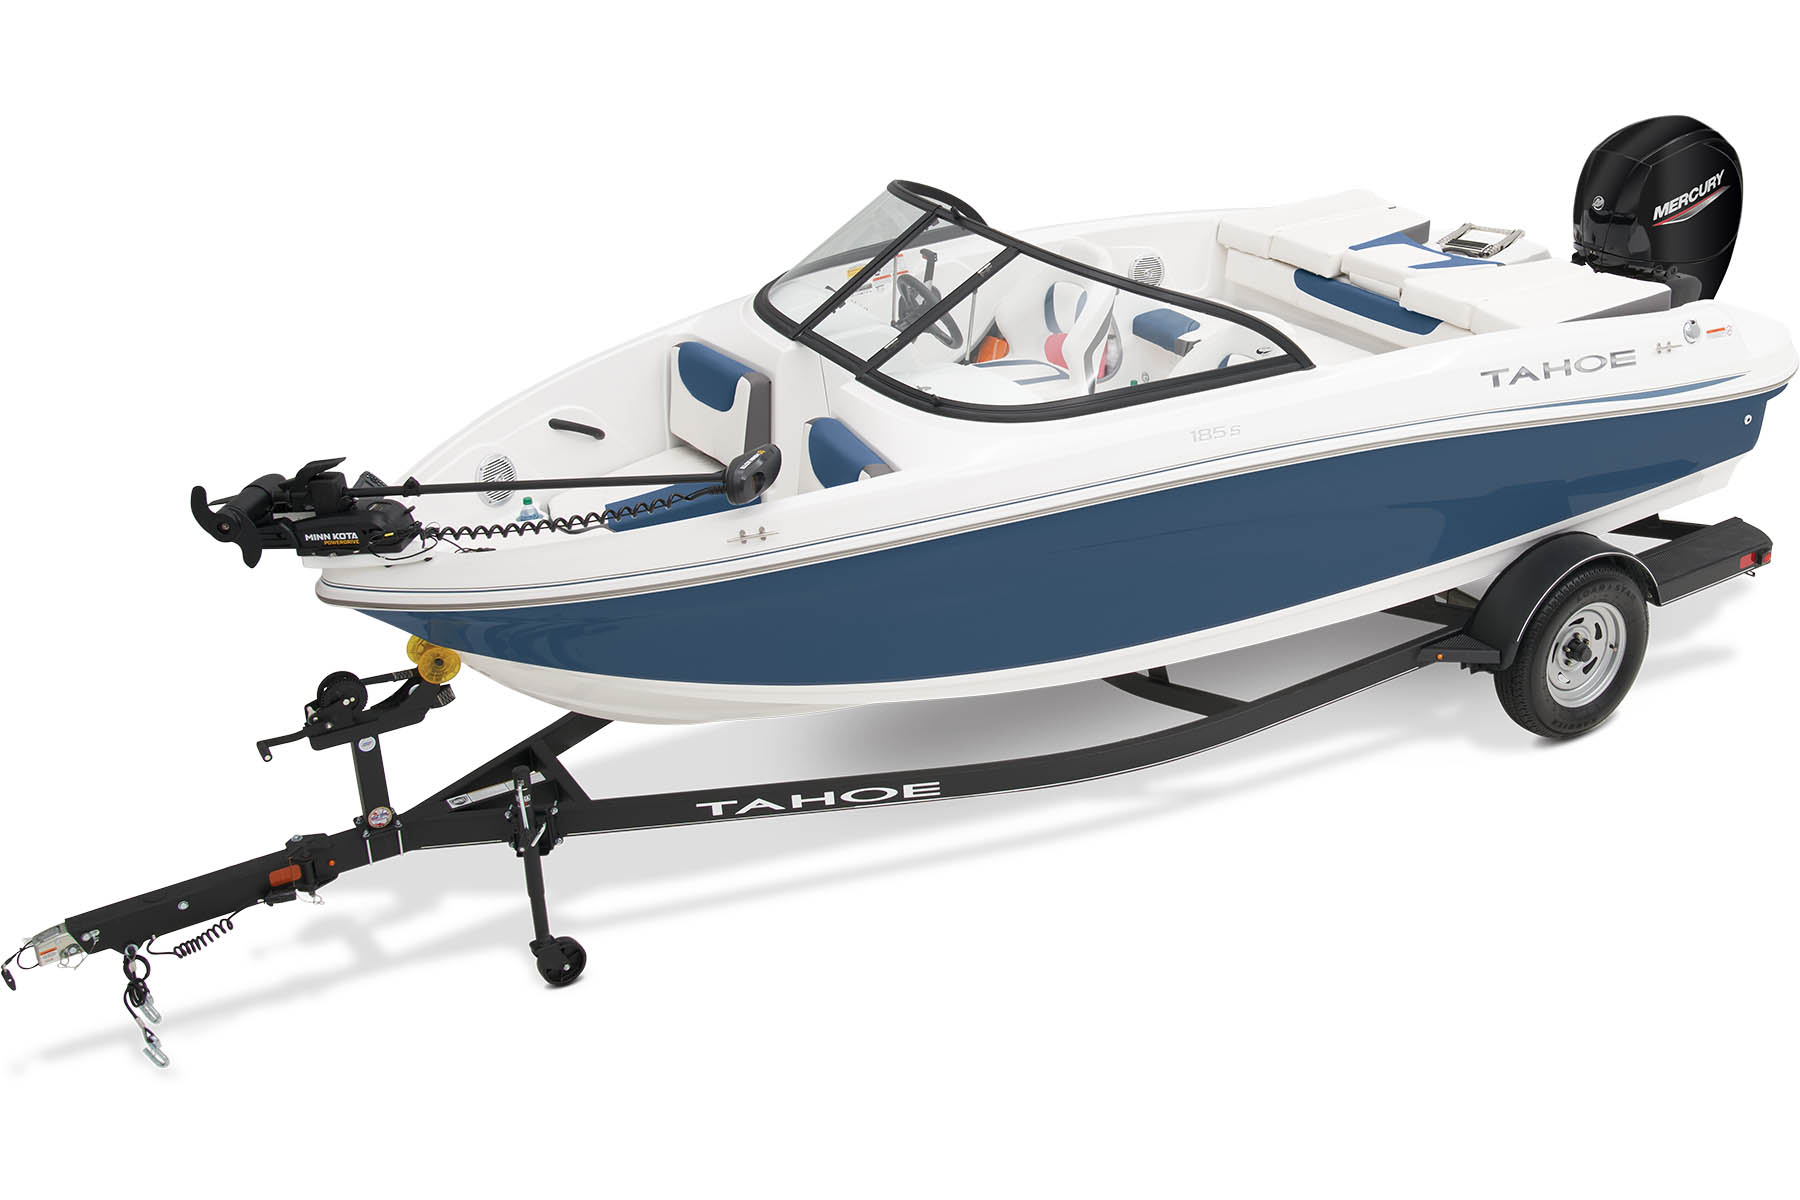 185 S - TAHOE Outboard Fish and Ski Boat